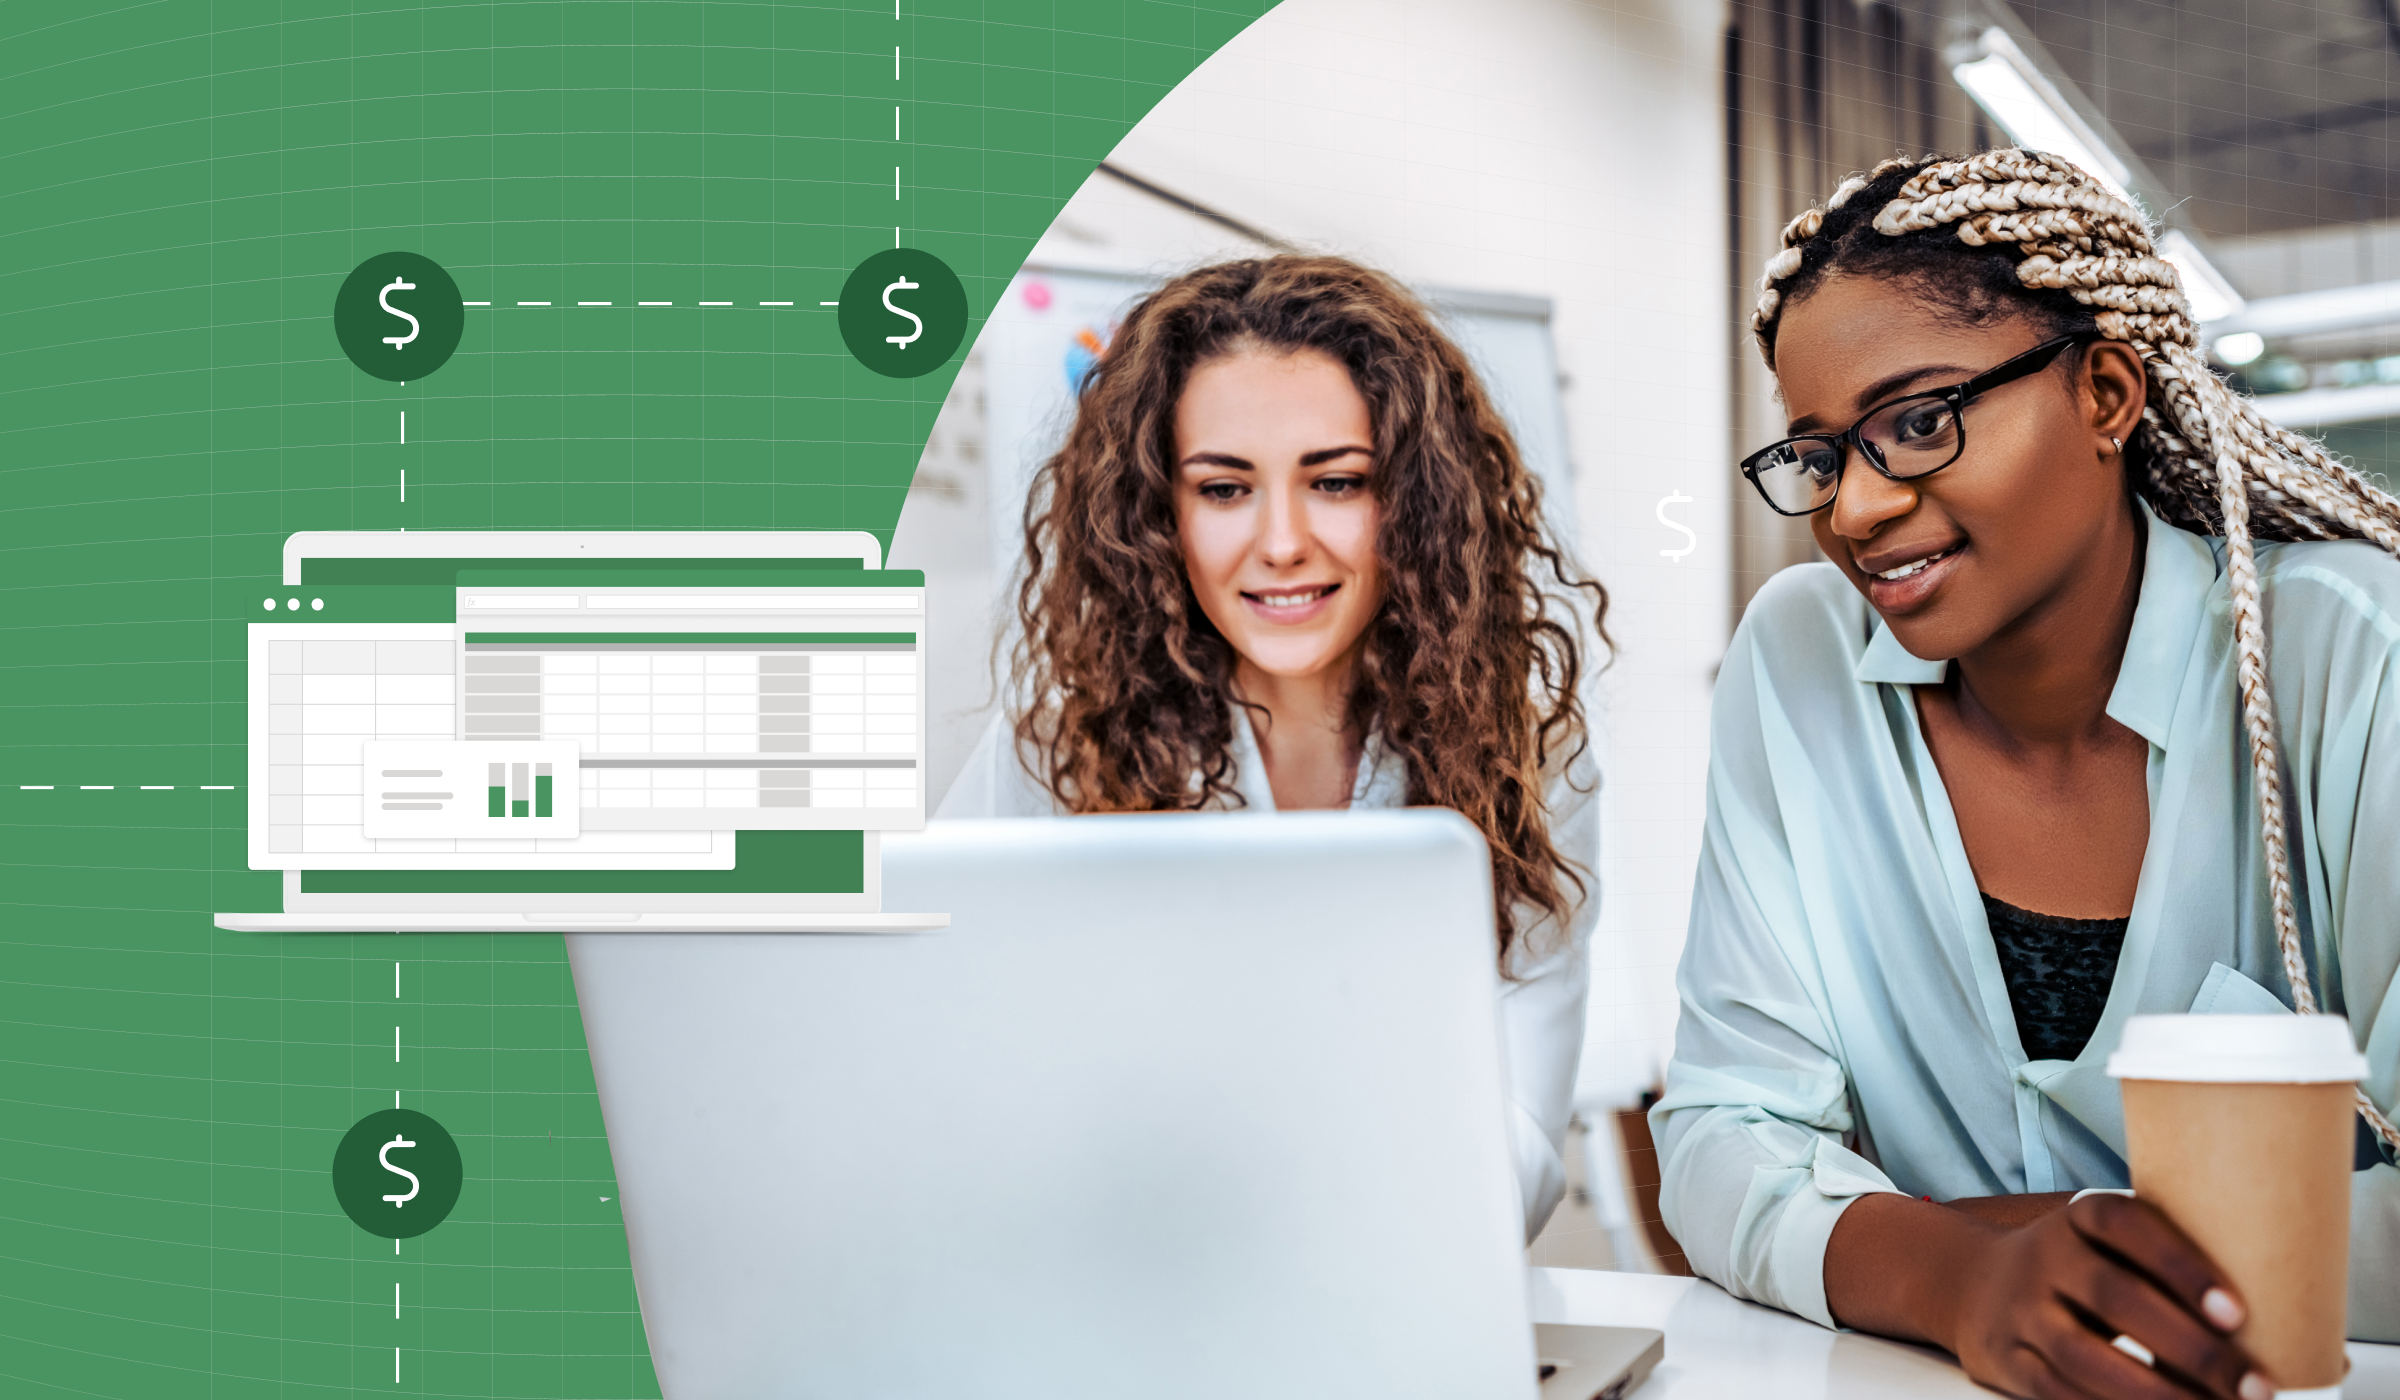 On the left, a small graphic of an excel spreadsheet. On the right of the image, two professional women looking at a laptop.